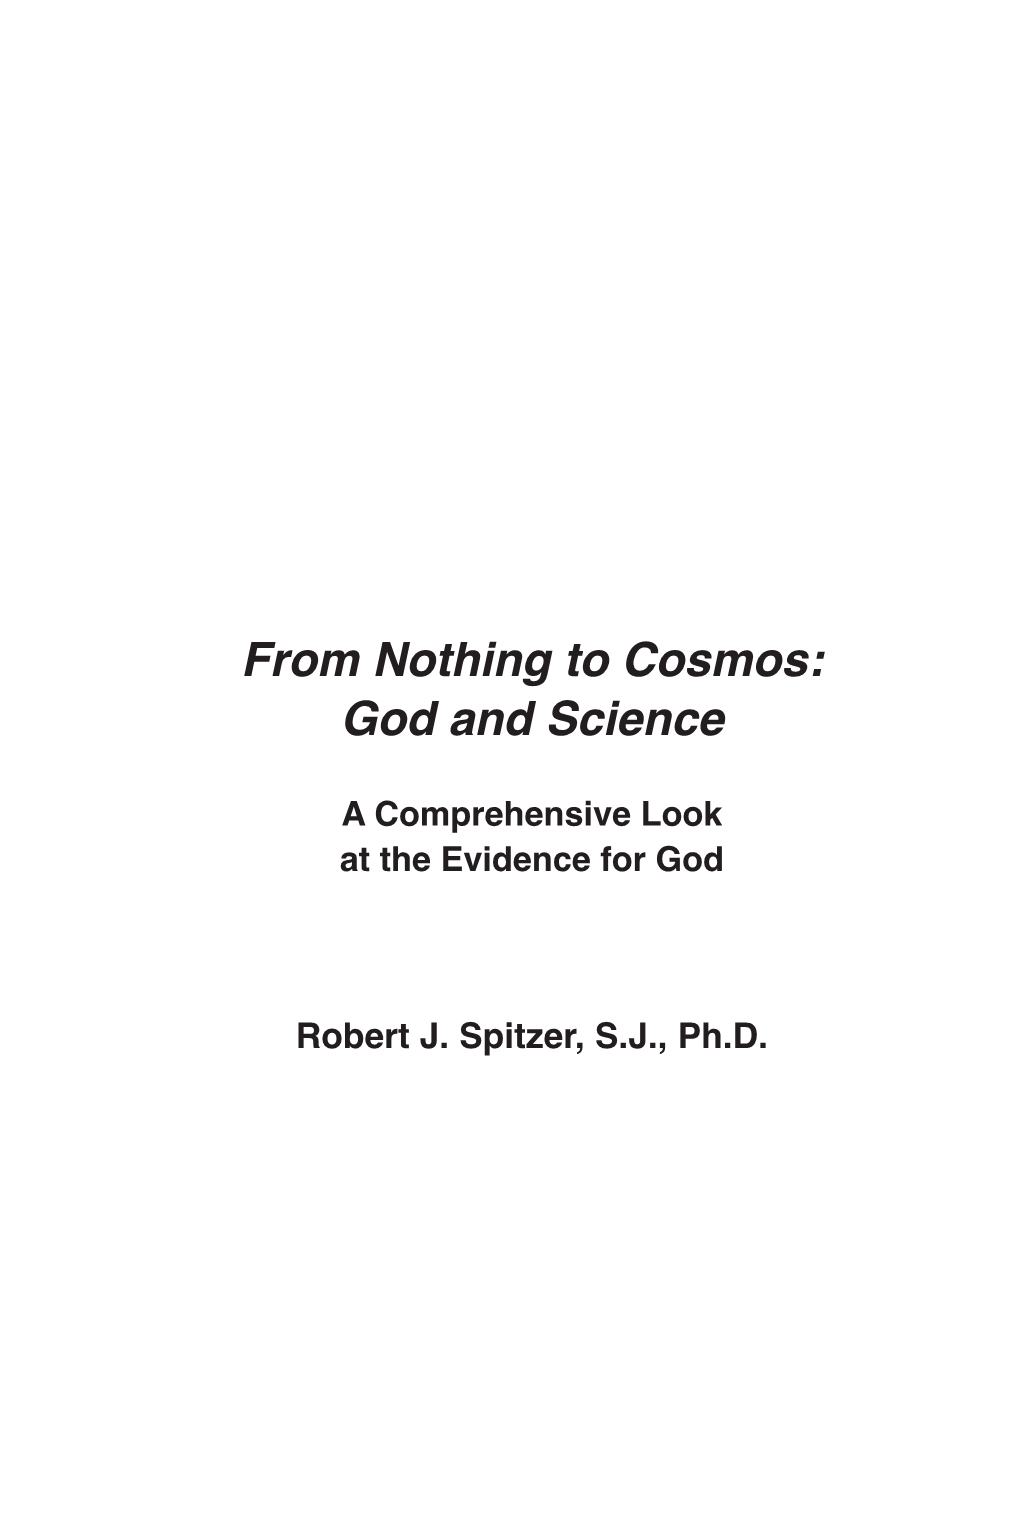 God and Science